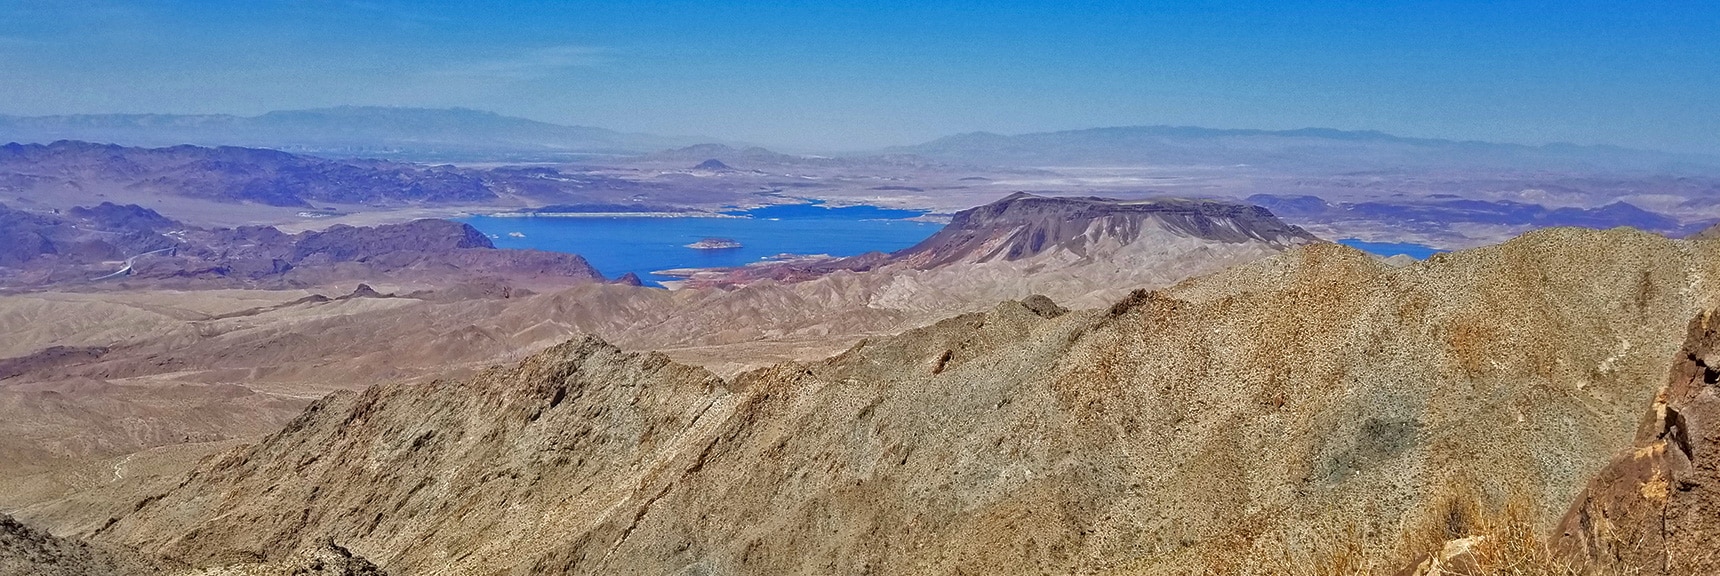 Lake Mead and Fortification Hill from Mt. Wilson Western Approach Ridge Pre-Summit Bluff | Mt. Wilson | Lake Mead National Recreation Area, Arizona